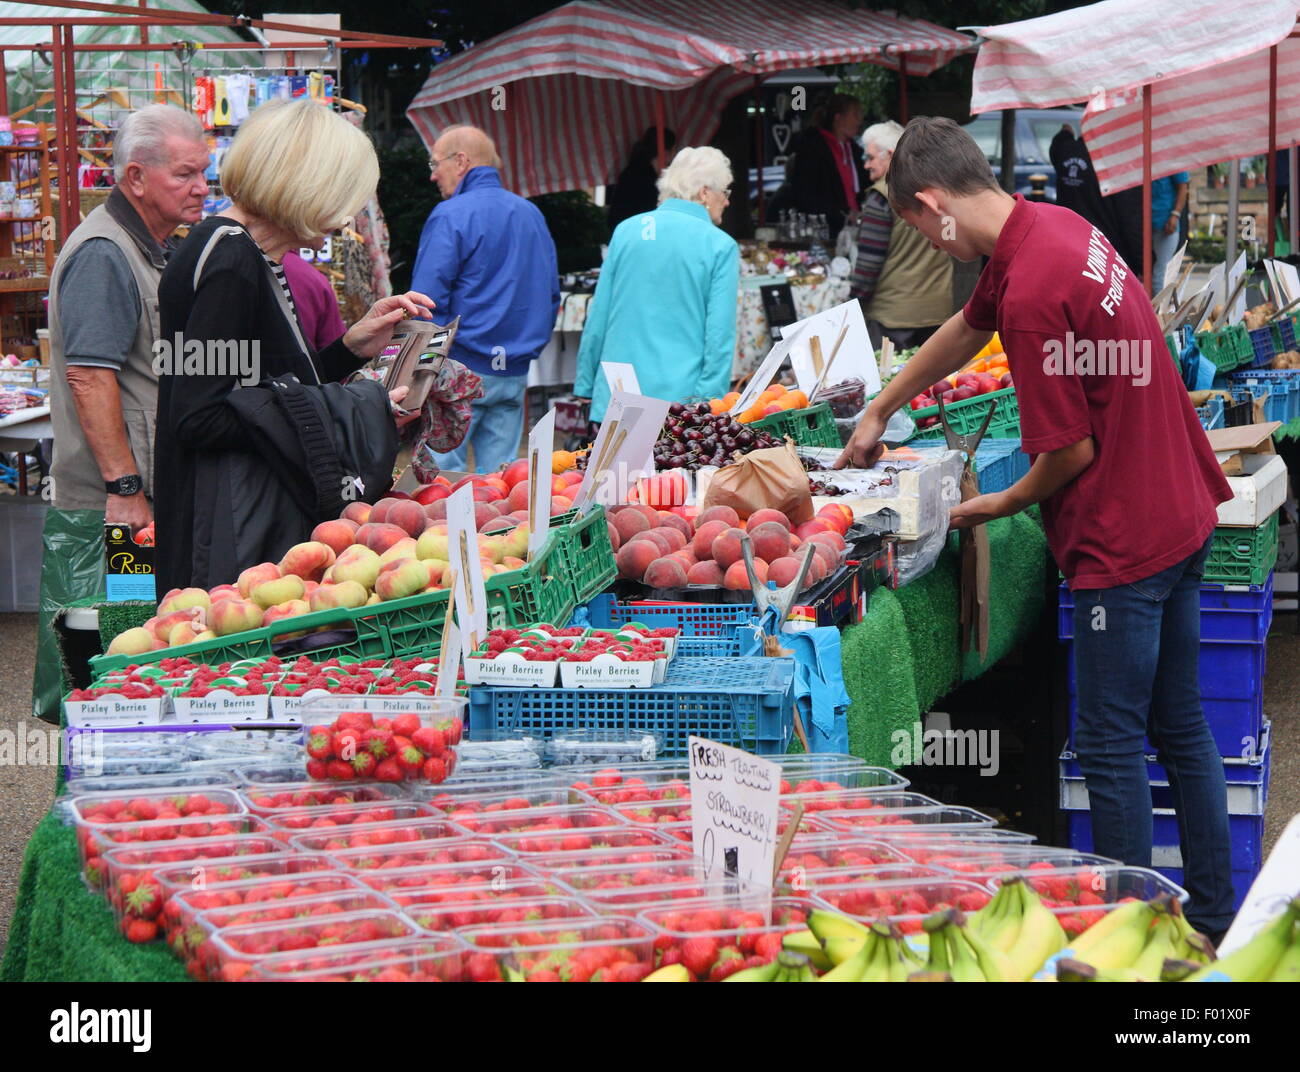 A fruit and vegetable stall at a rural outdoor market, Matlock ...